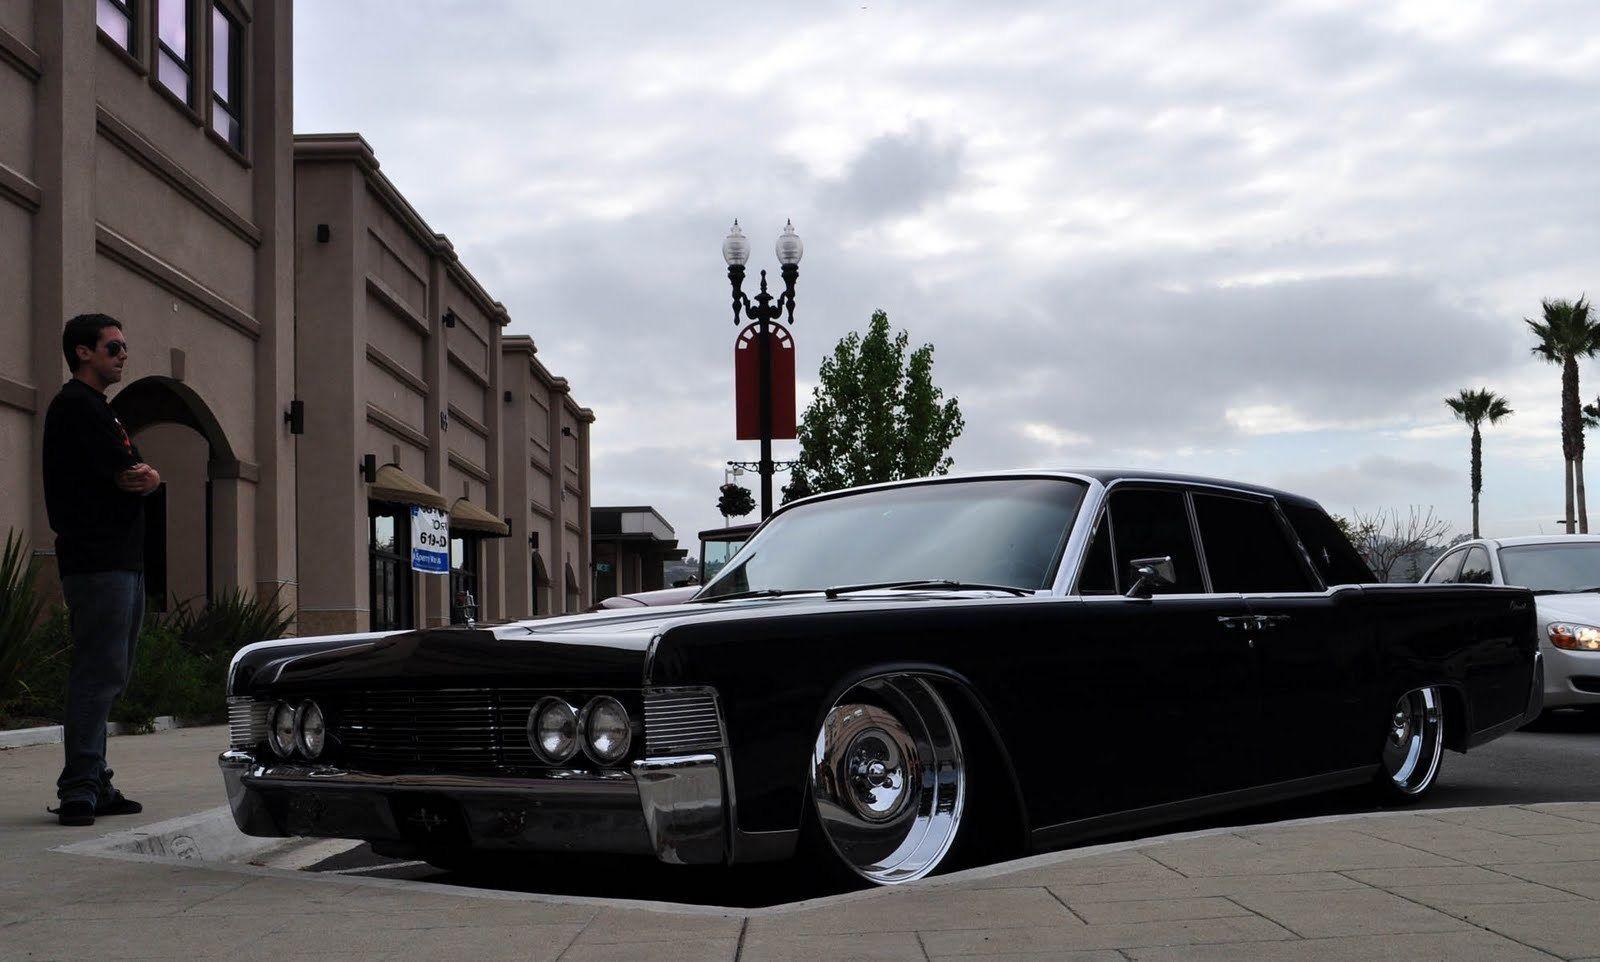 48 Lowrider Wallpapers and Backgrounds  WallpaperSafari